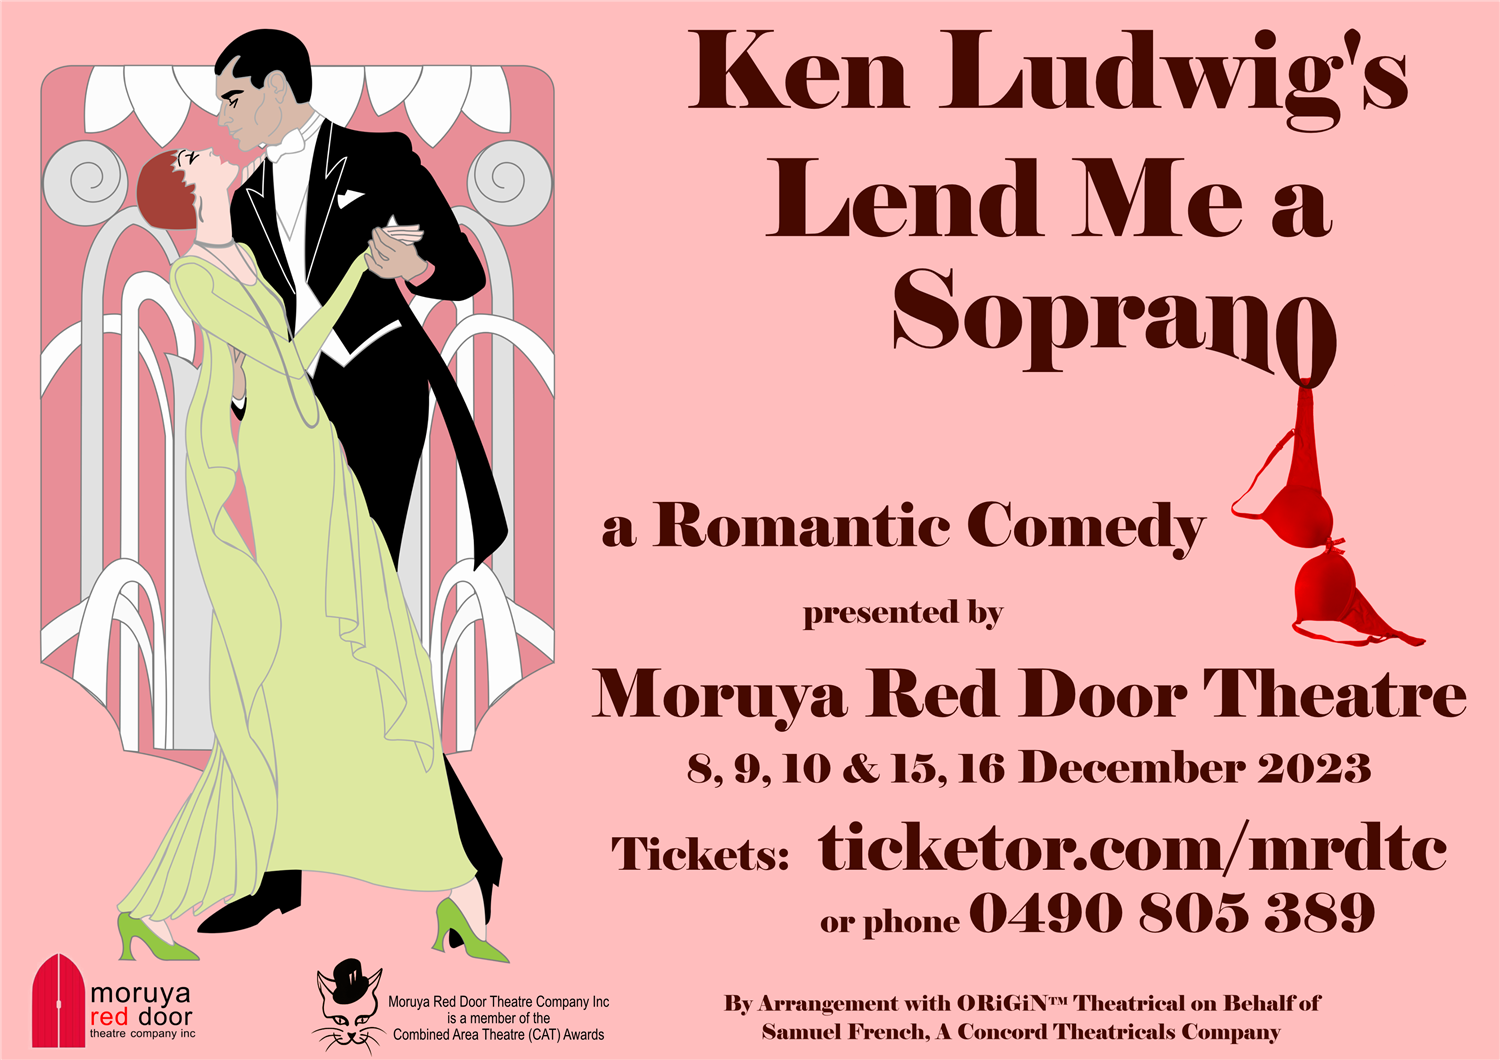 Ken Ludwig's  Lend Me a Soprano Four Night Shows: 8, 9 & 15 ,16 December BYO Drinks & Nibblies on Dec 18, 00:00@Moruya RSL - Pick a seat, Buy tickets and Get information on Moruya Red Door Theatre 